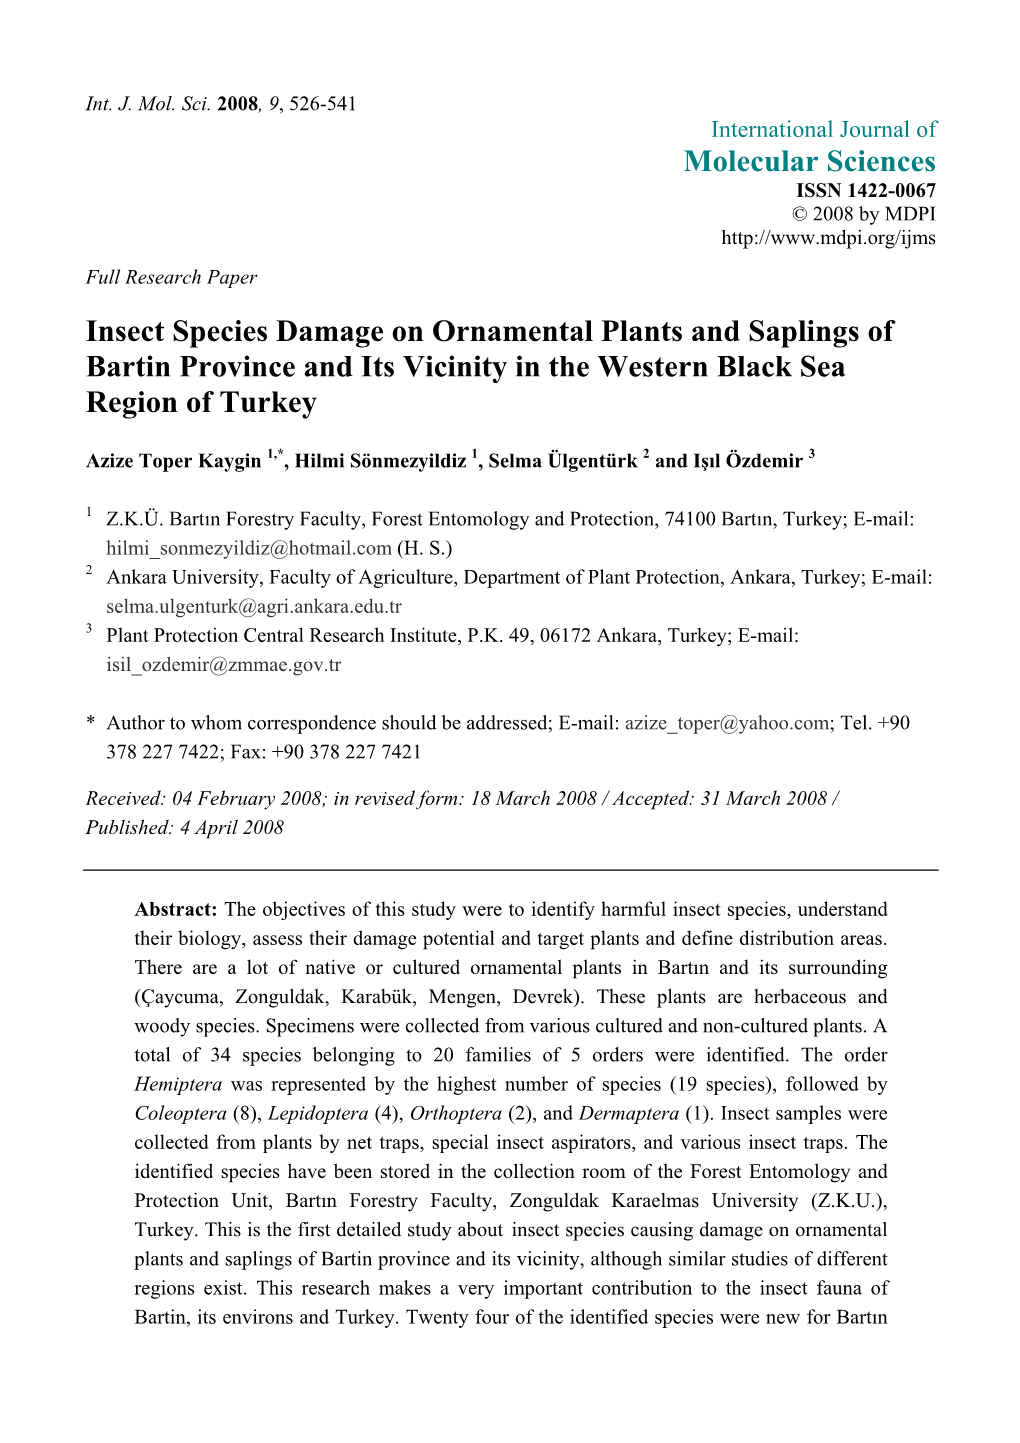 Insect Species Damage on Ornamental Plants and Saplings of Bartin Province and Its Vicinity in the Western Black Sea Region of Turkey